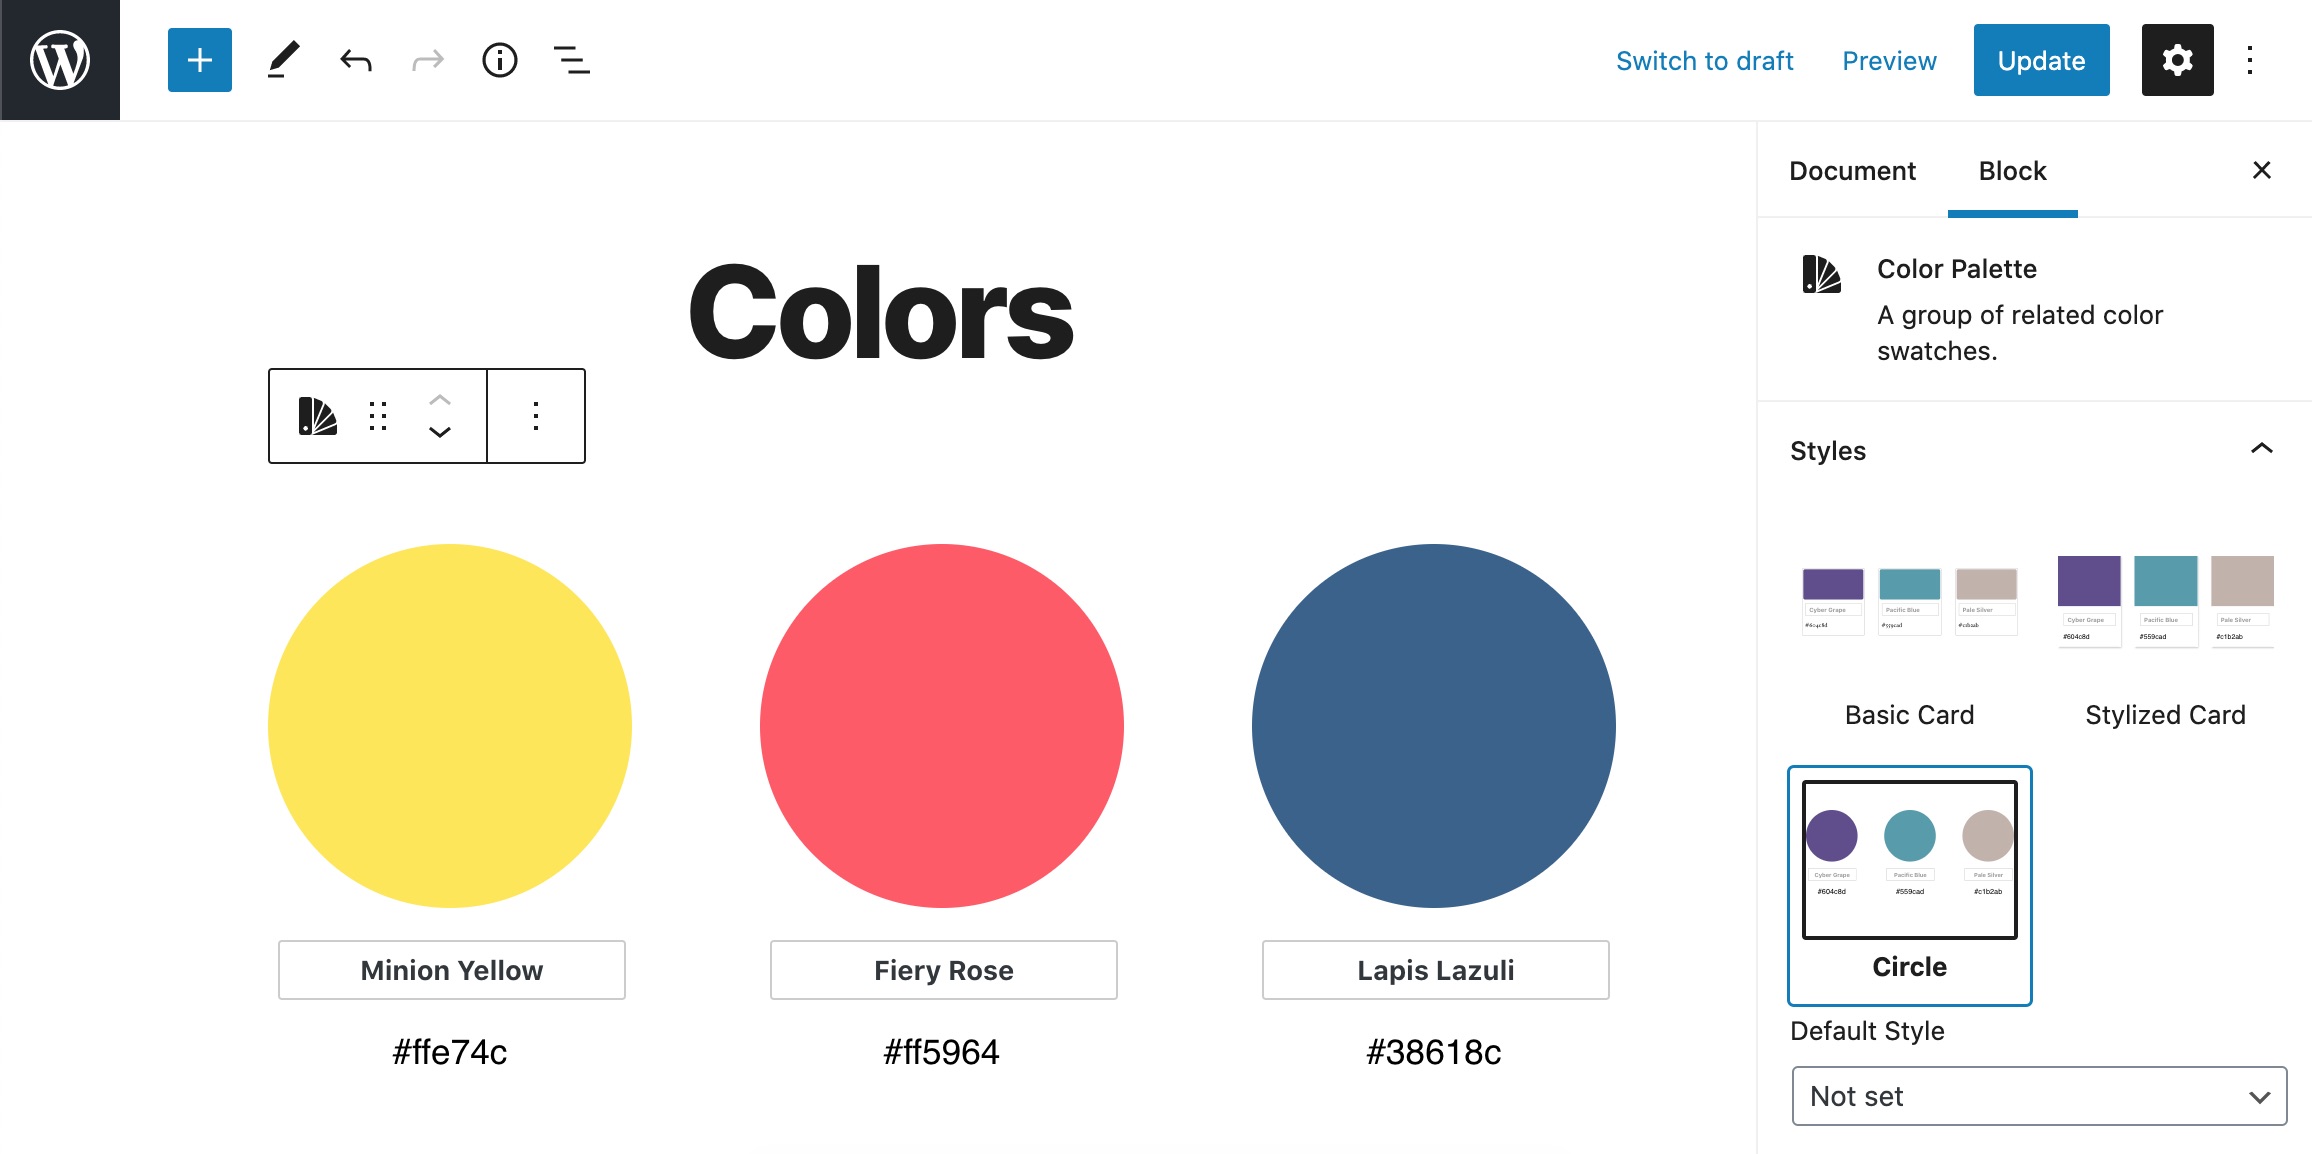 The Color Palette block in the post editor, displaying the colors as circles.